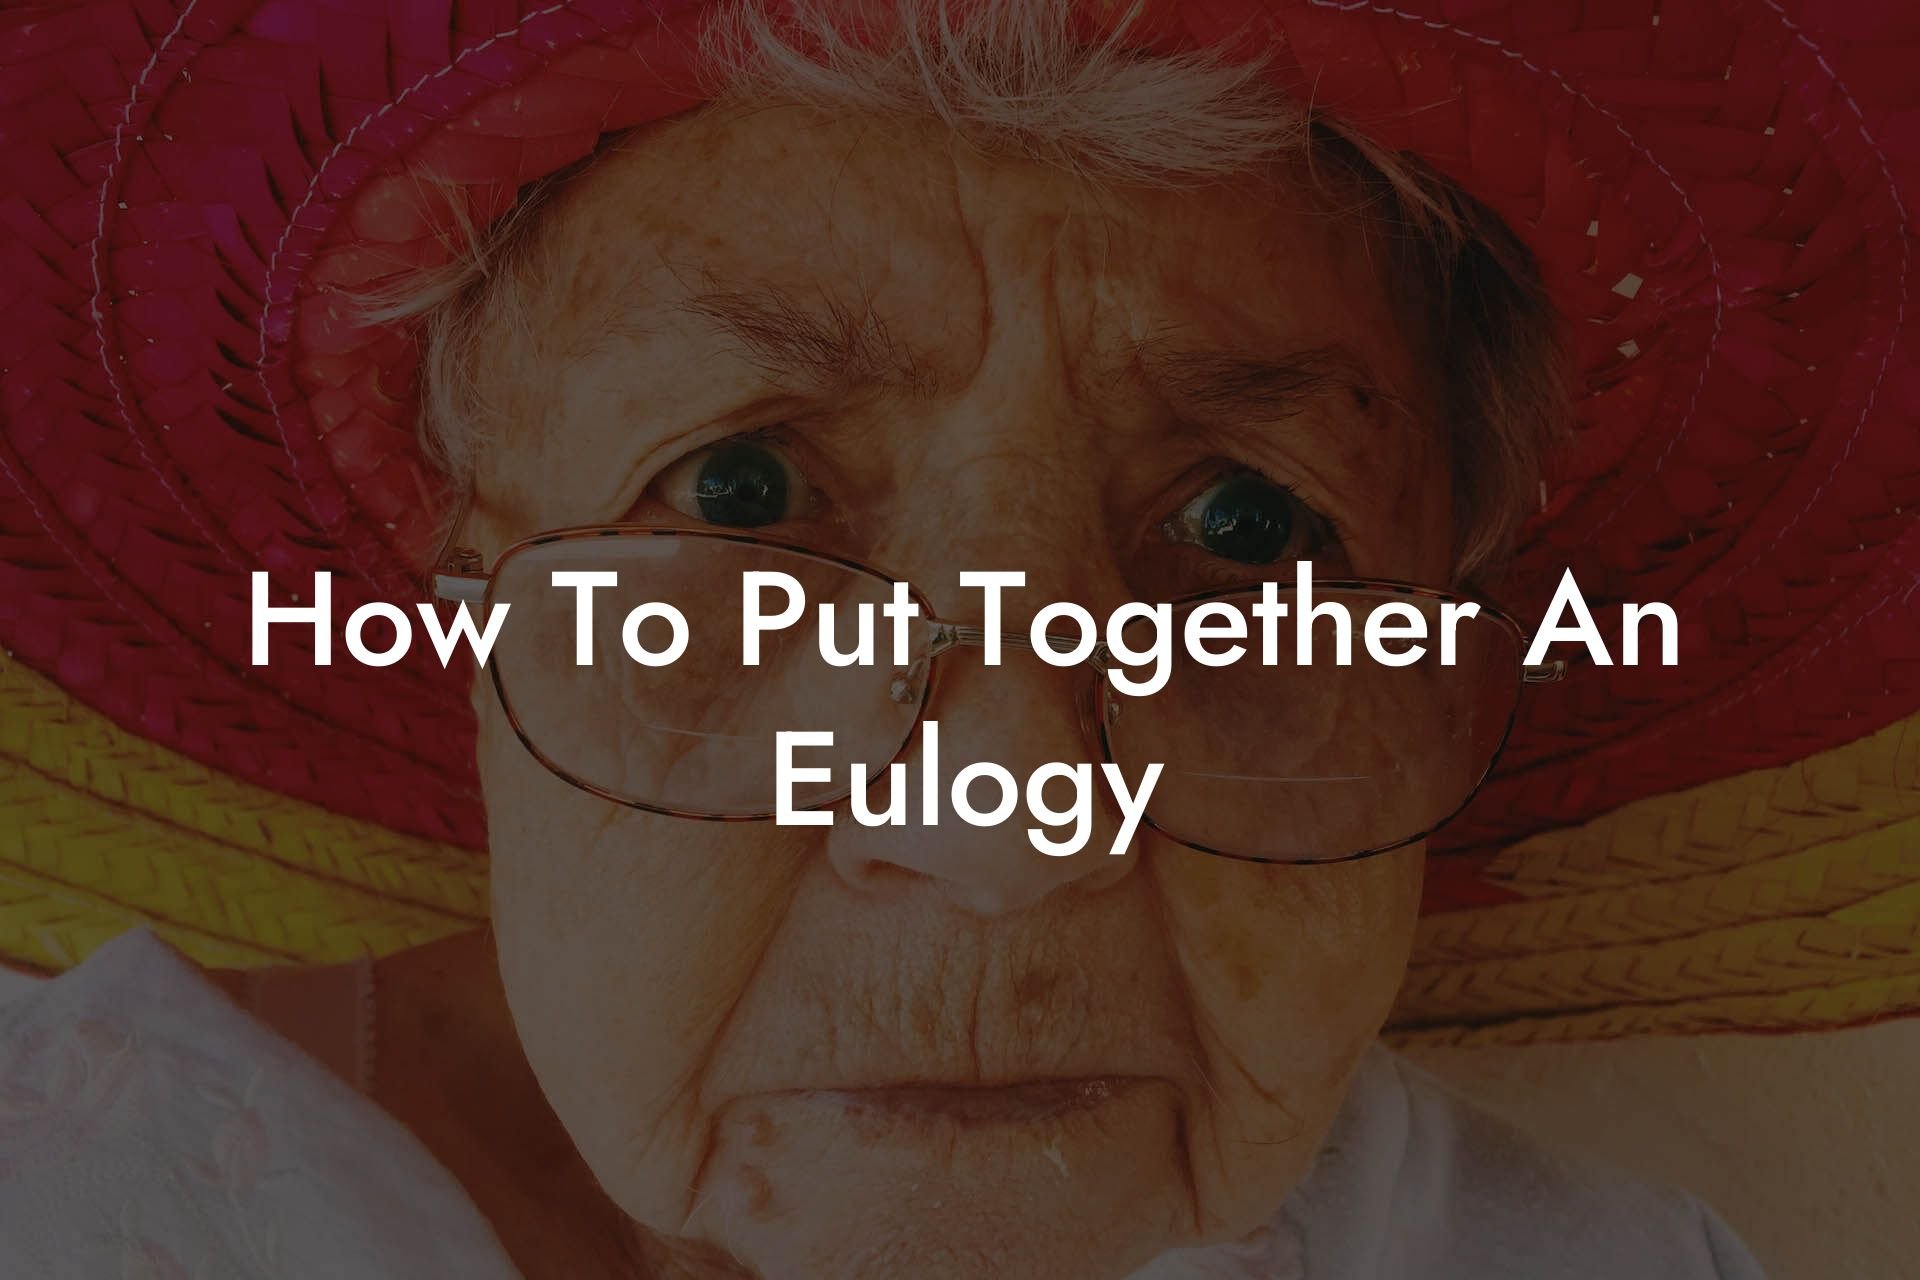 How To Put Together An Eulogy